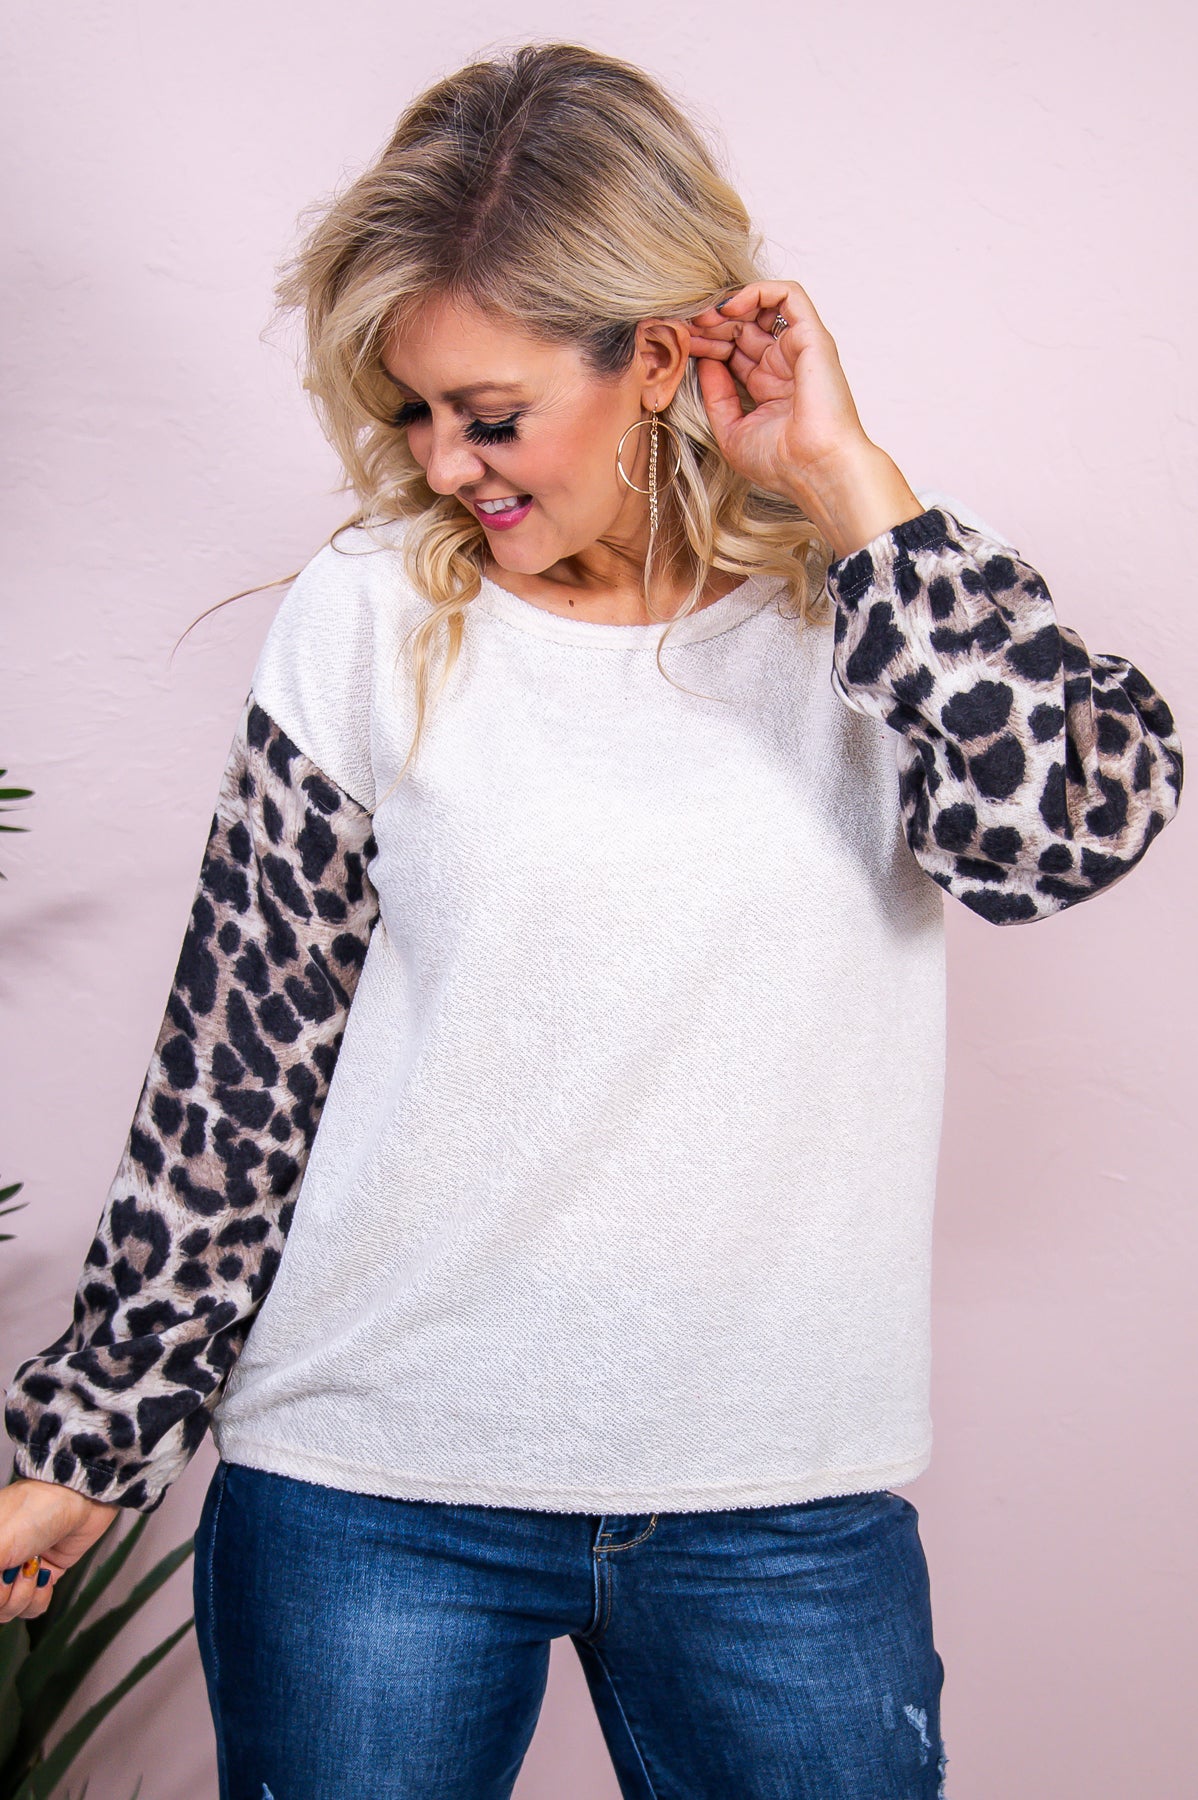 The Snuggle Is Real Oatmeal/Multi Color Printed Top - T8276OA